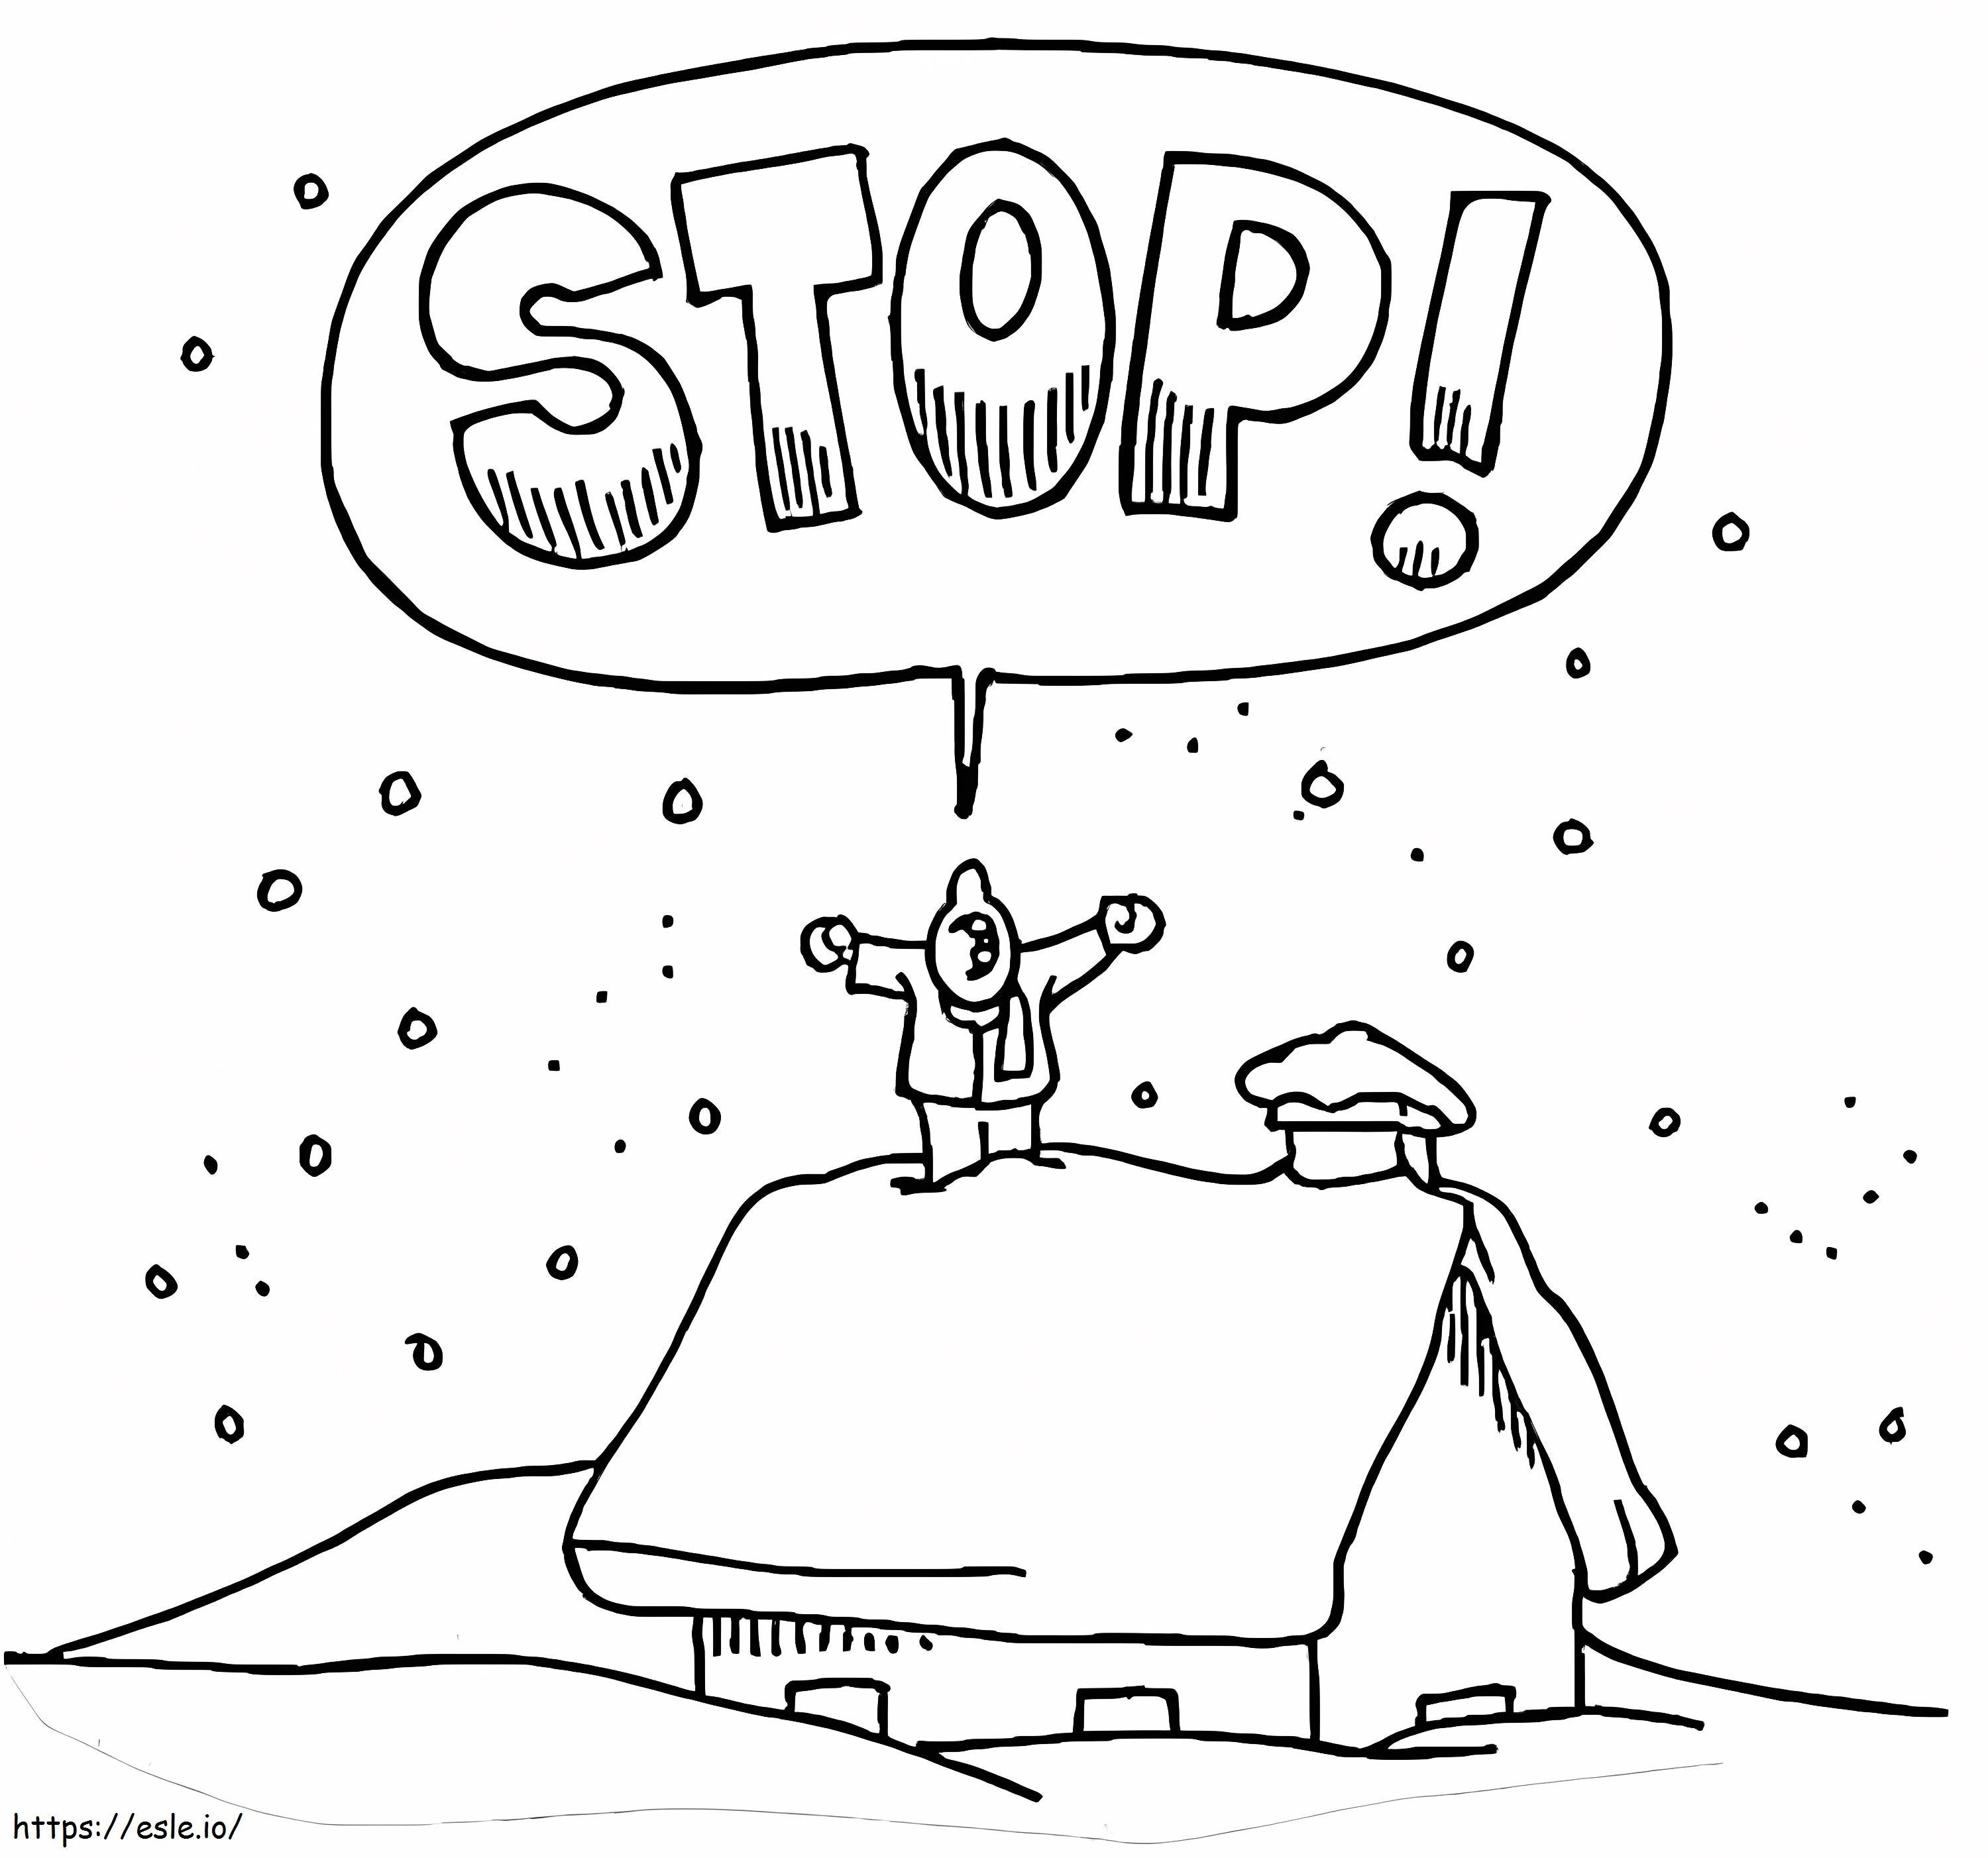 Stop Winter coloring page